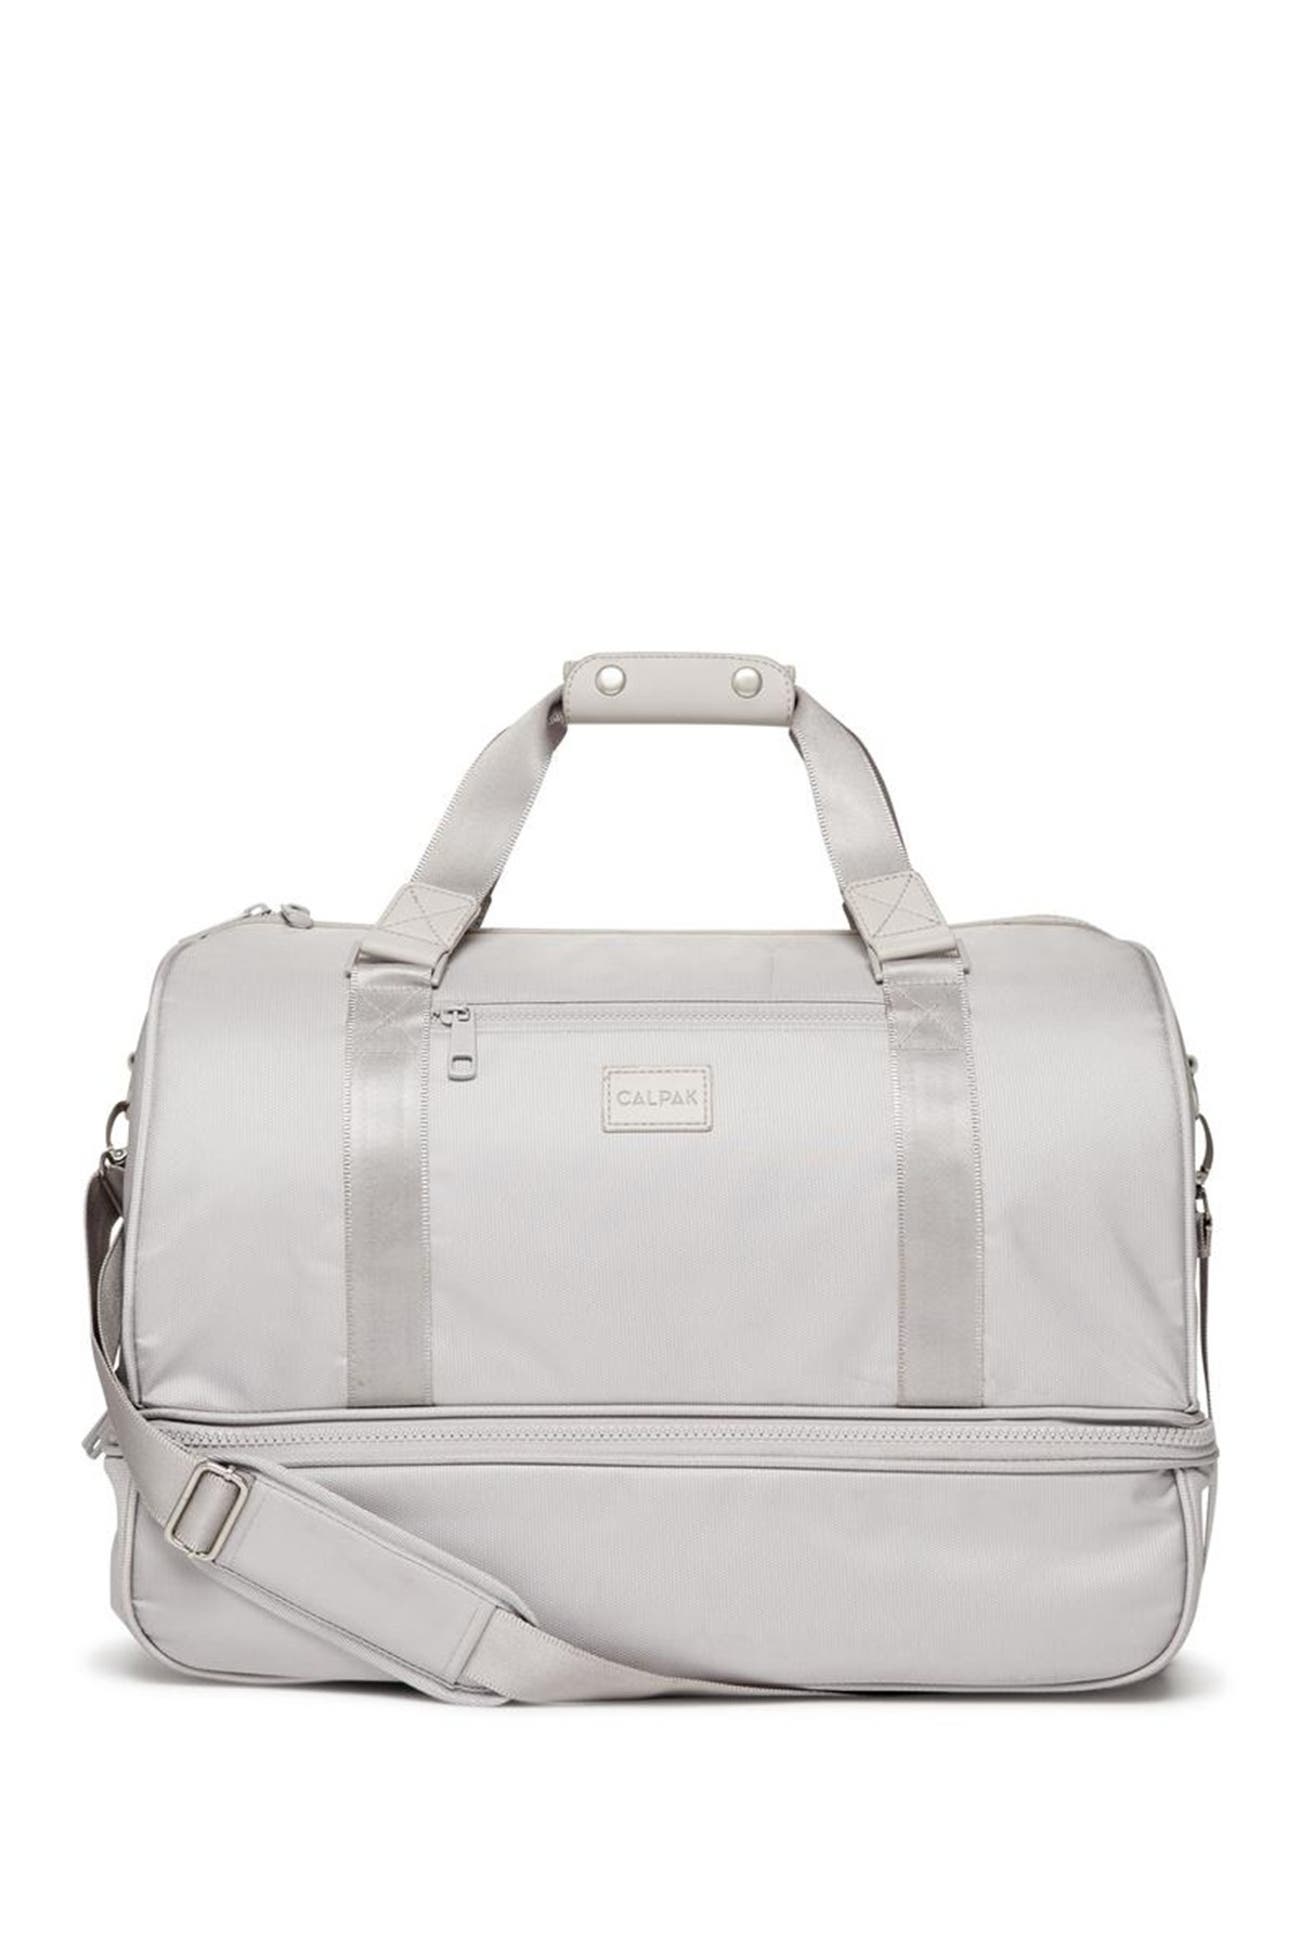 Luxury Duffle Bag Brands For Women Over 50 | IQS Executive